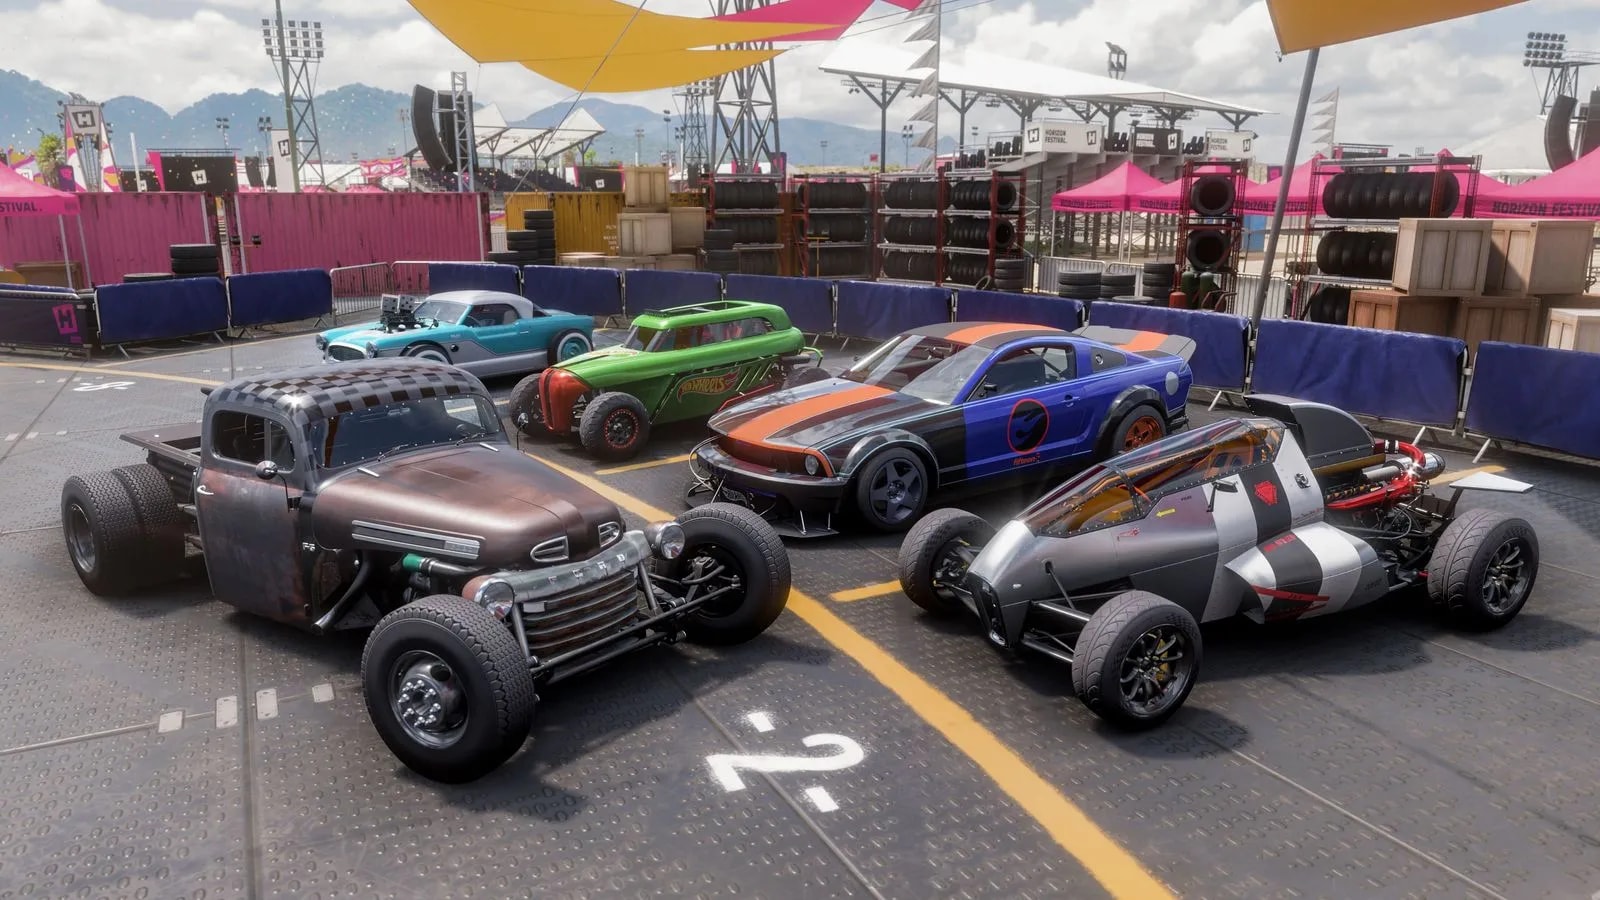 Forza Horizon 5 Series 9 Is All About Hot Wheels, Here Is What's Coming -  autoevolution